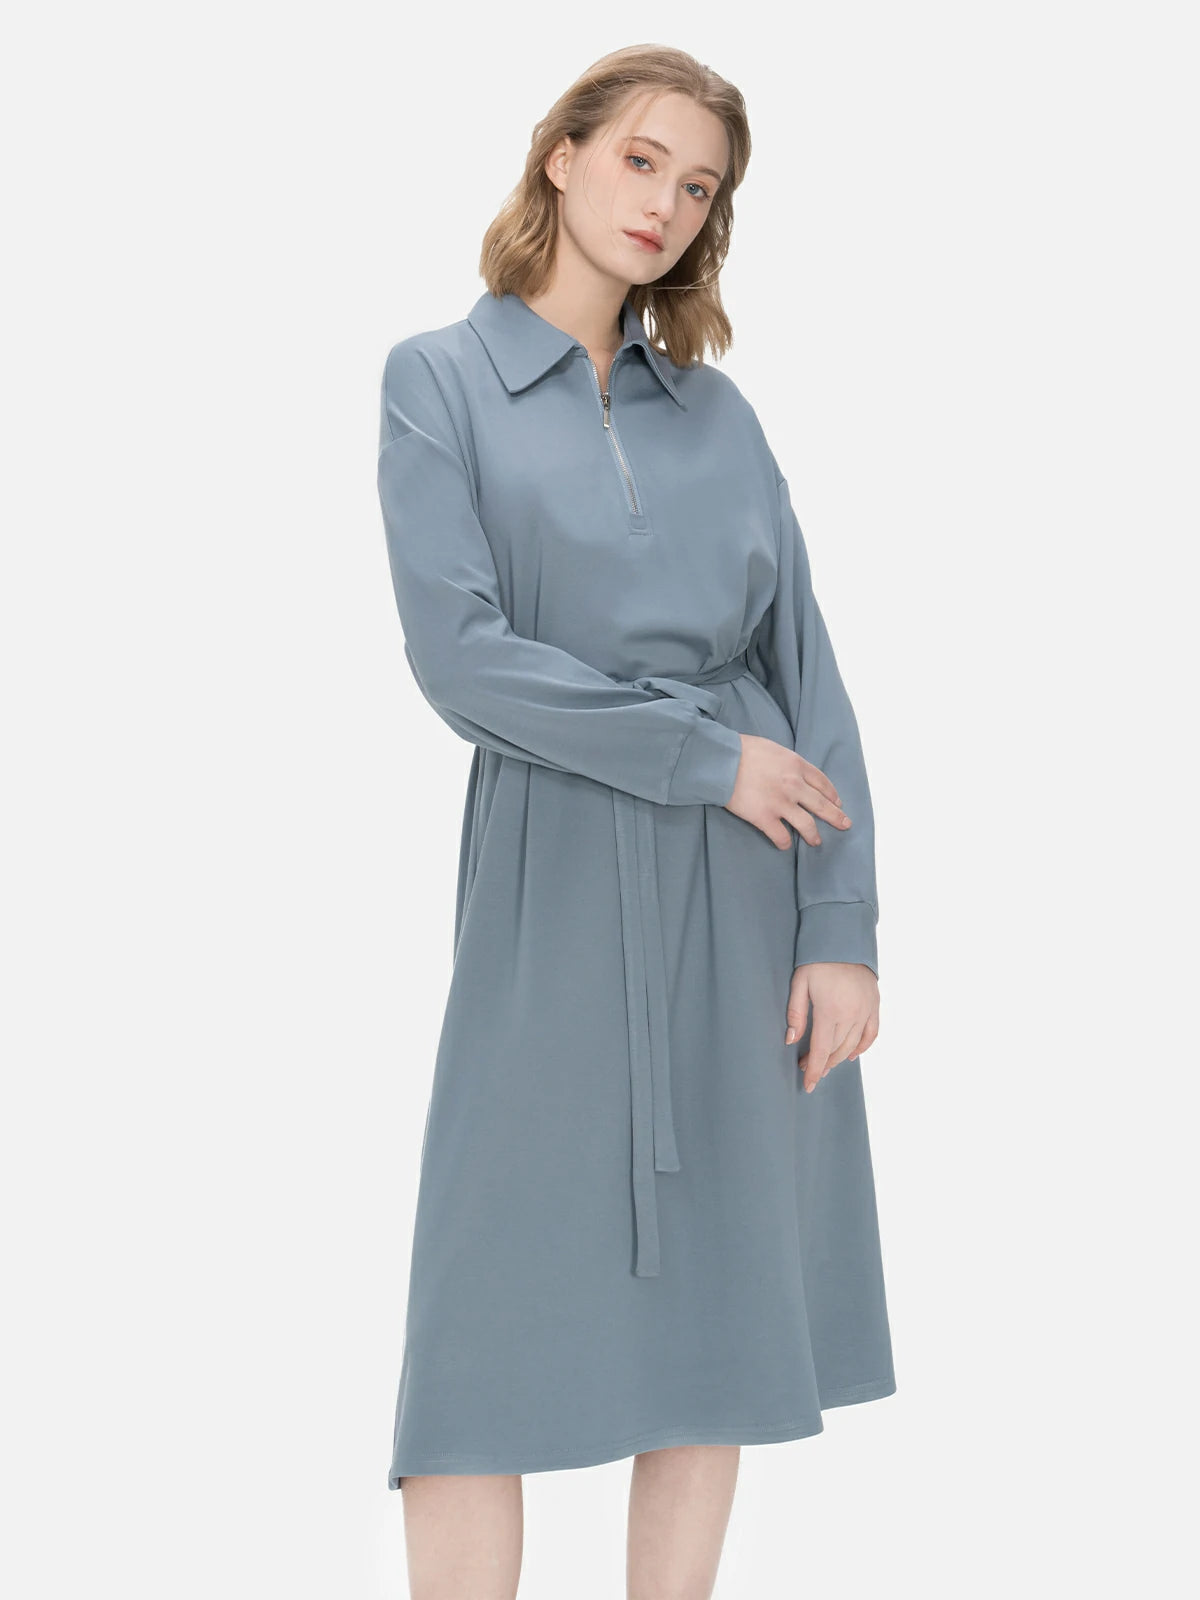 Tailored fit midi dress with a belted waist, collar, and front zipper detailing, combining comfort and style seamlessly.